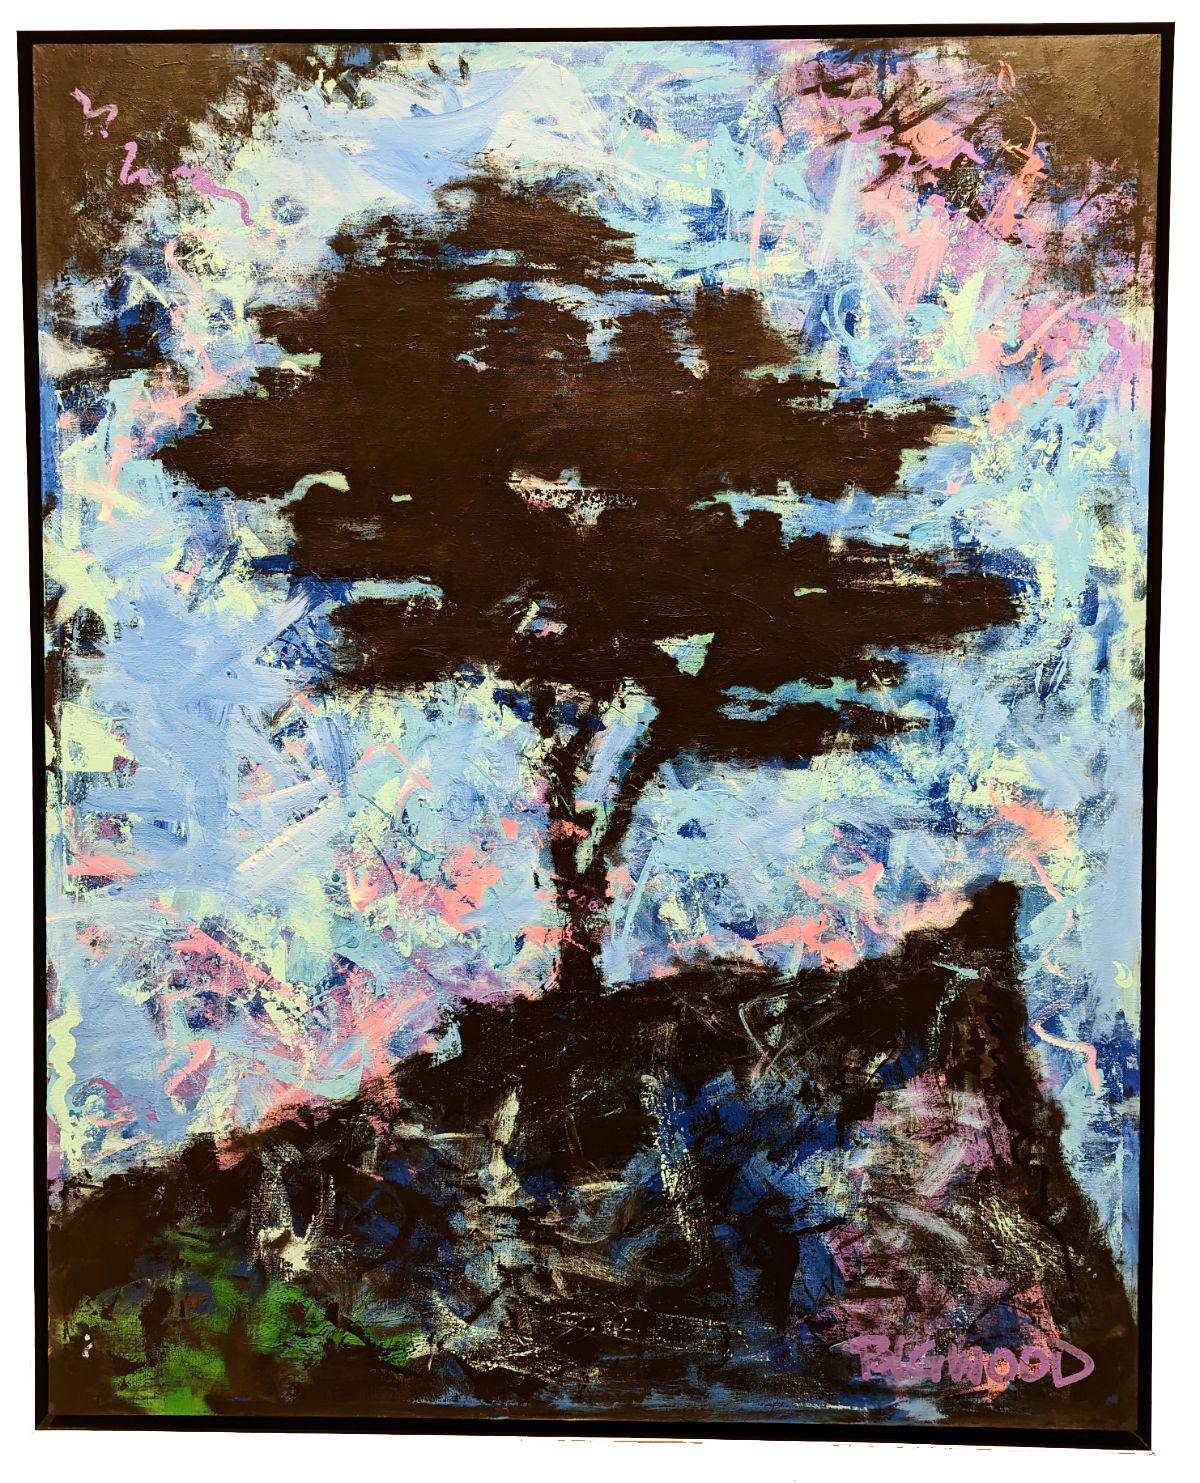 'The Lone Cypress' tree by Beverly Bigwood

About the artist, Beverly Bigwood
Award-winning Artist Beverly Bigwood (Bigwood Art) received the highest compliment an artist can receive in their career; Beverly’s artwork was stolen from a Westwood